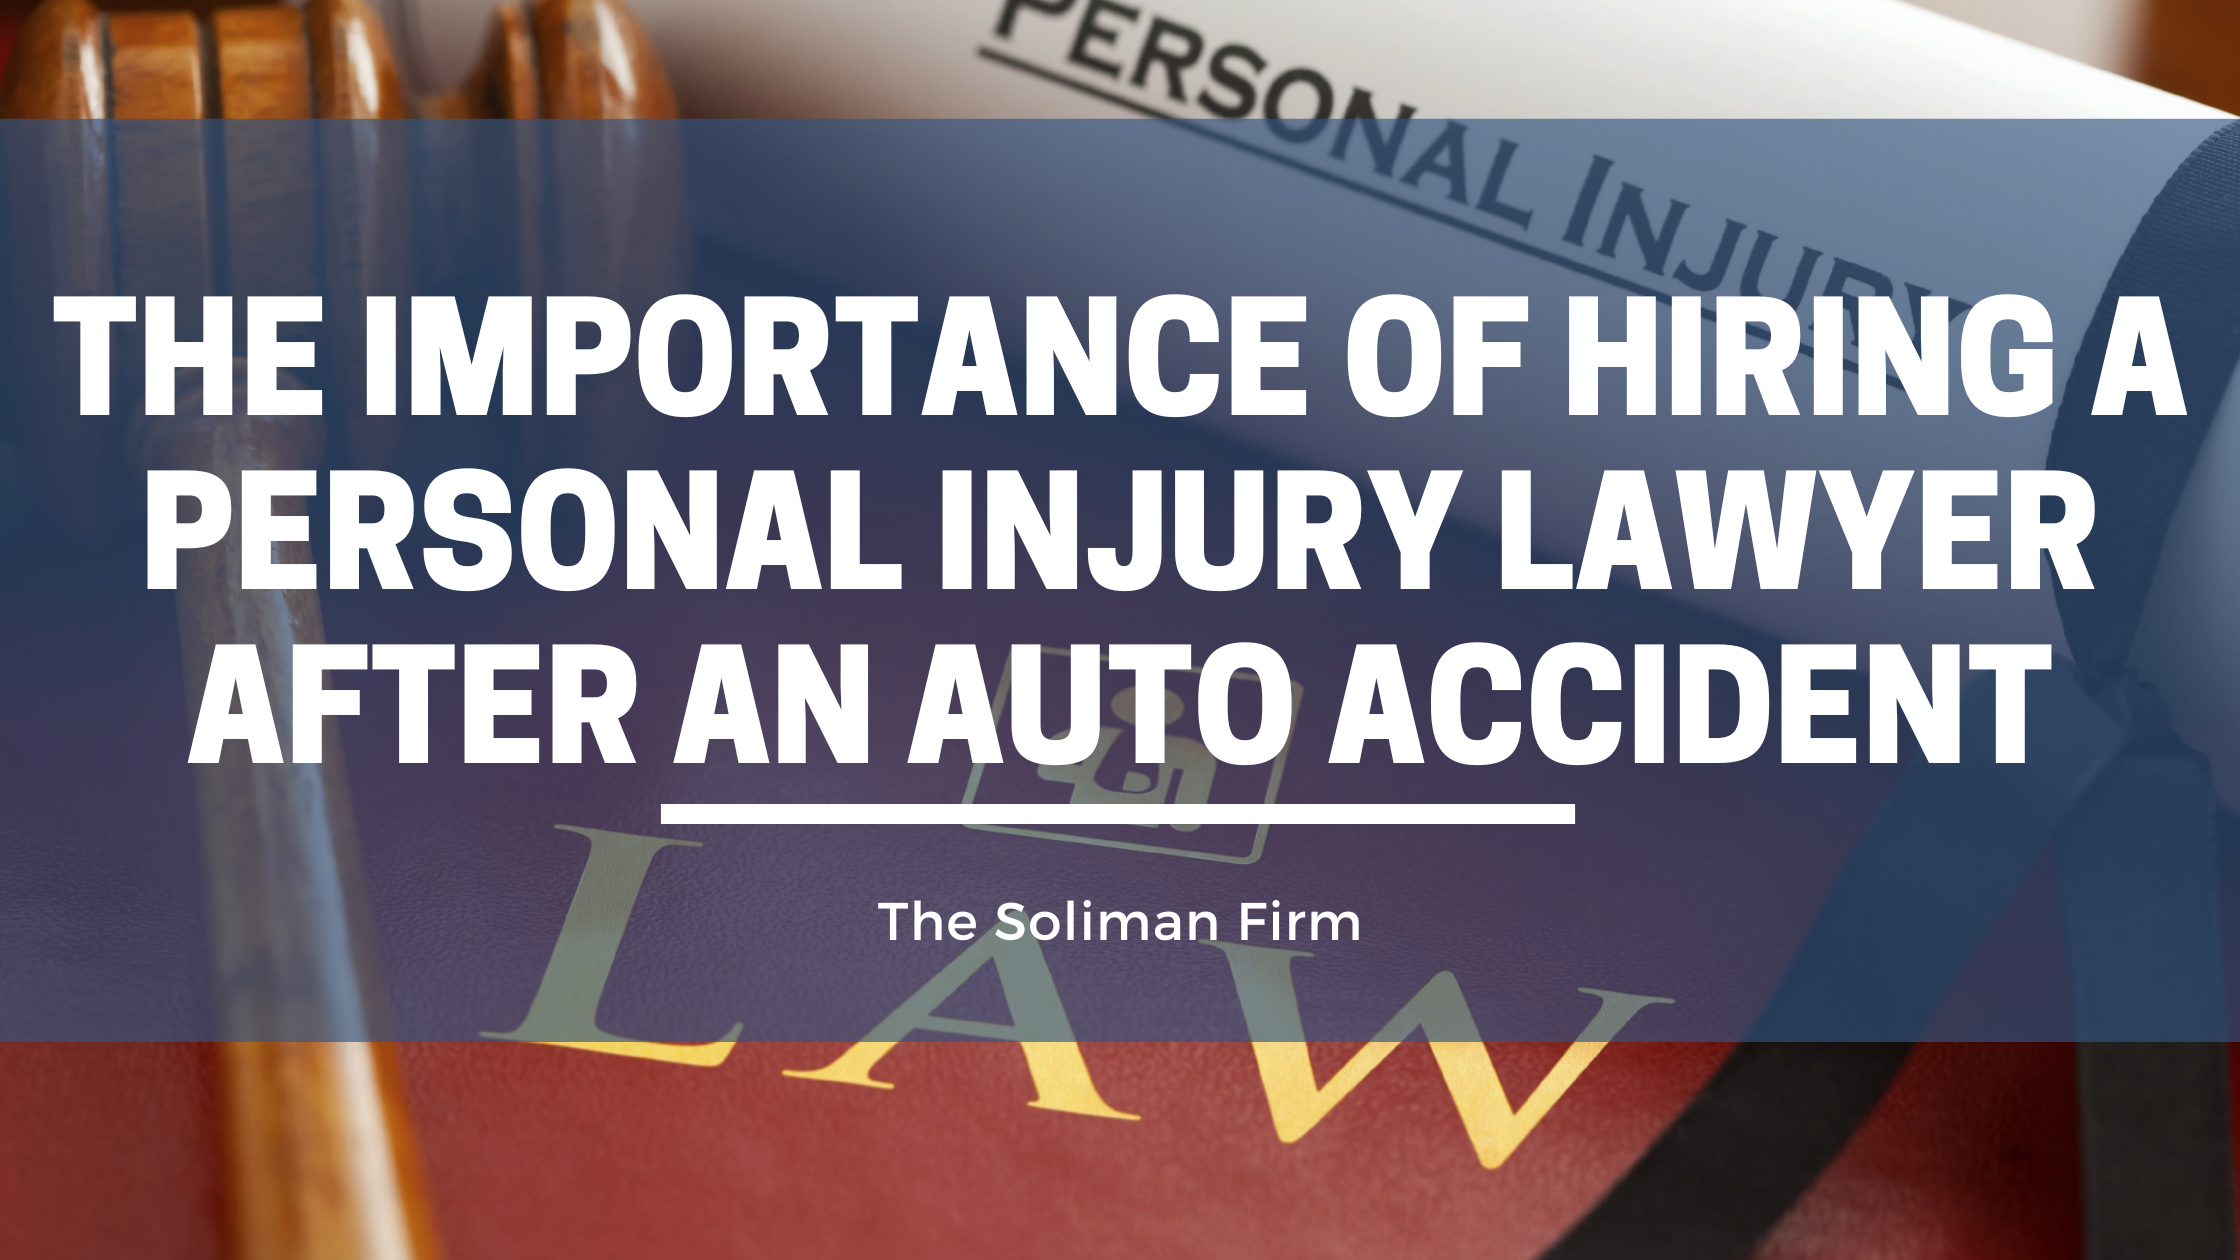 The importance of hiring a personal injury lawyer after an auto accident